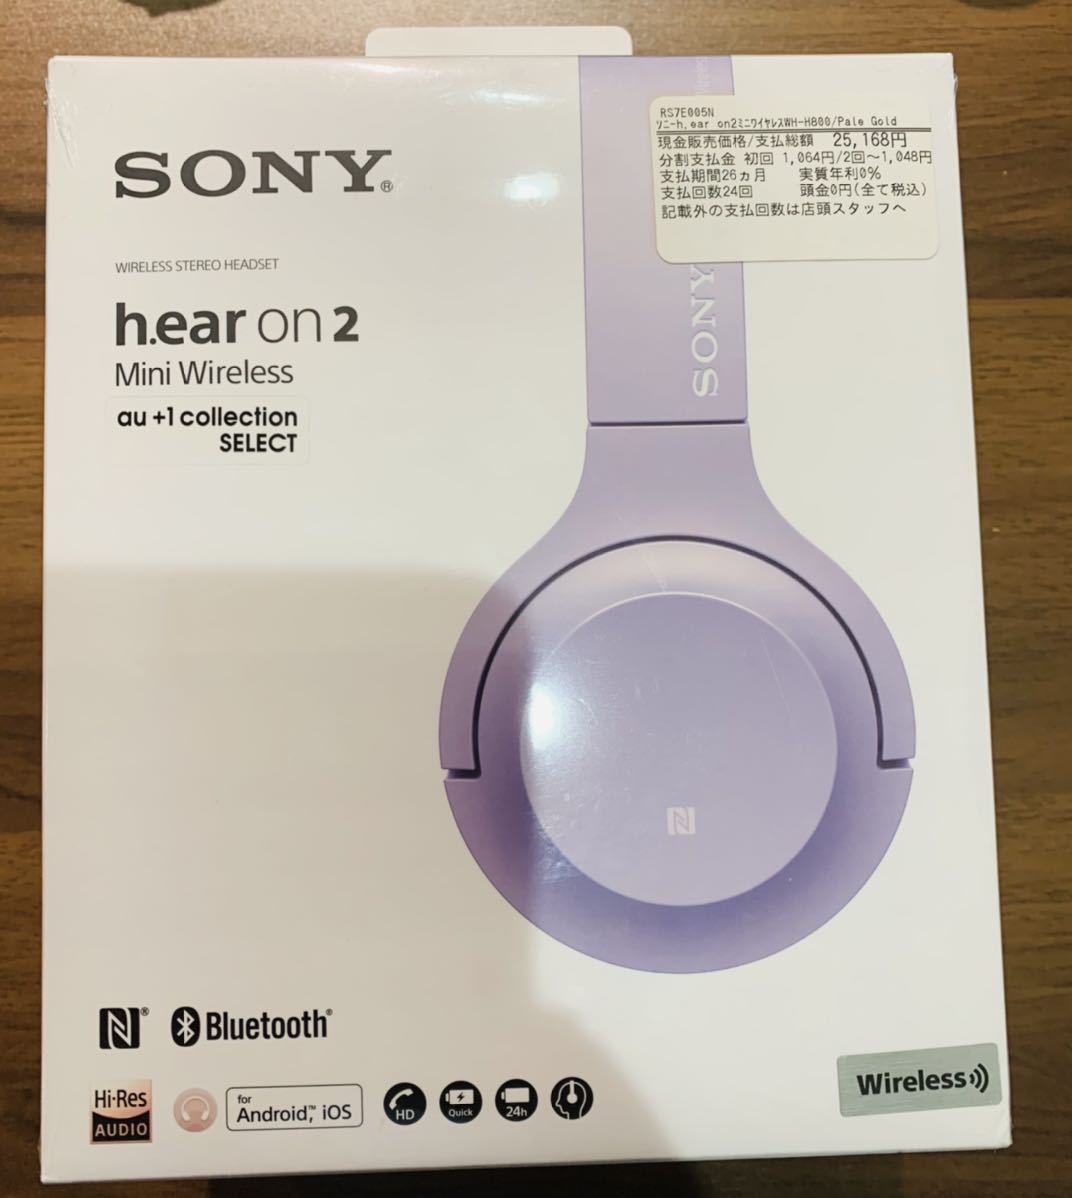 SONY h.ear on 2 Mini Wireless WH-H800 (R) [トワイライトレッド 